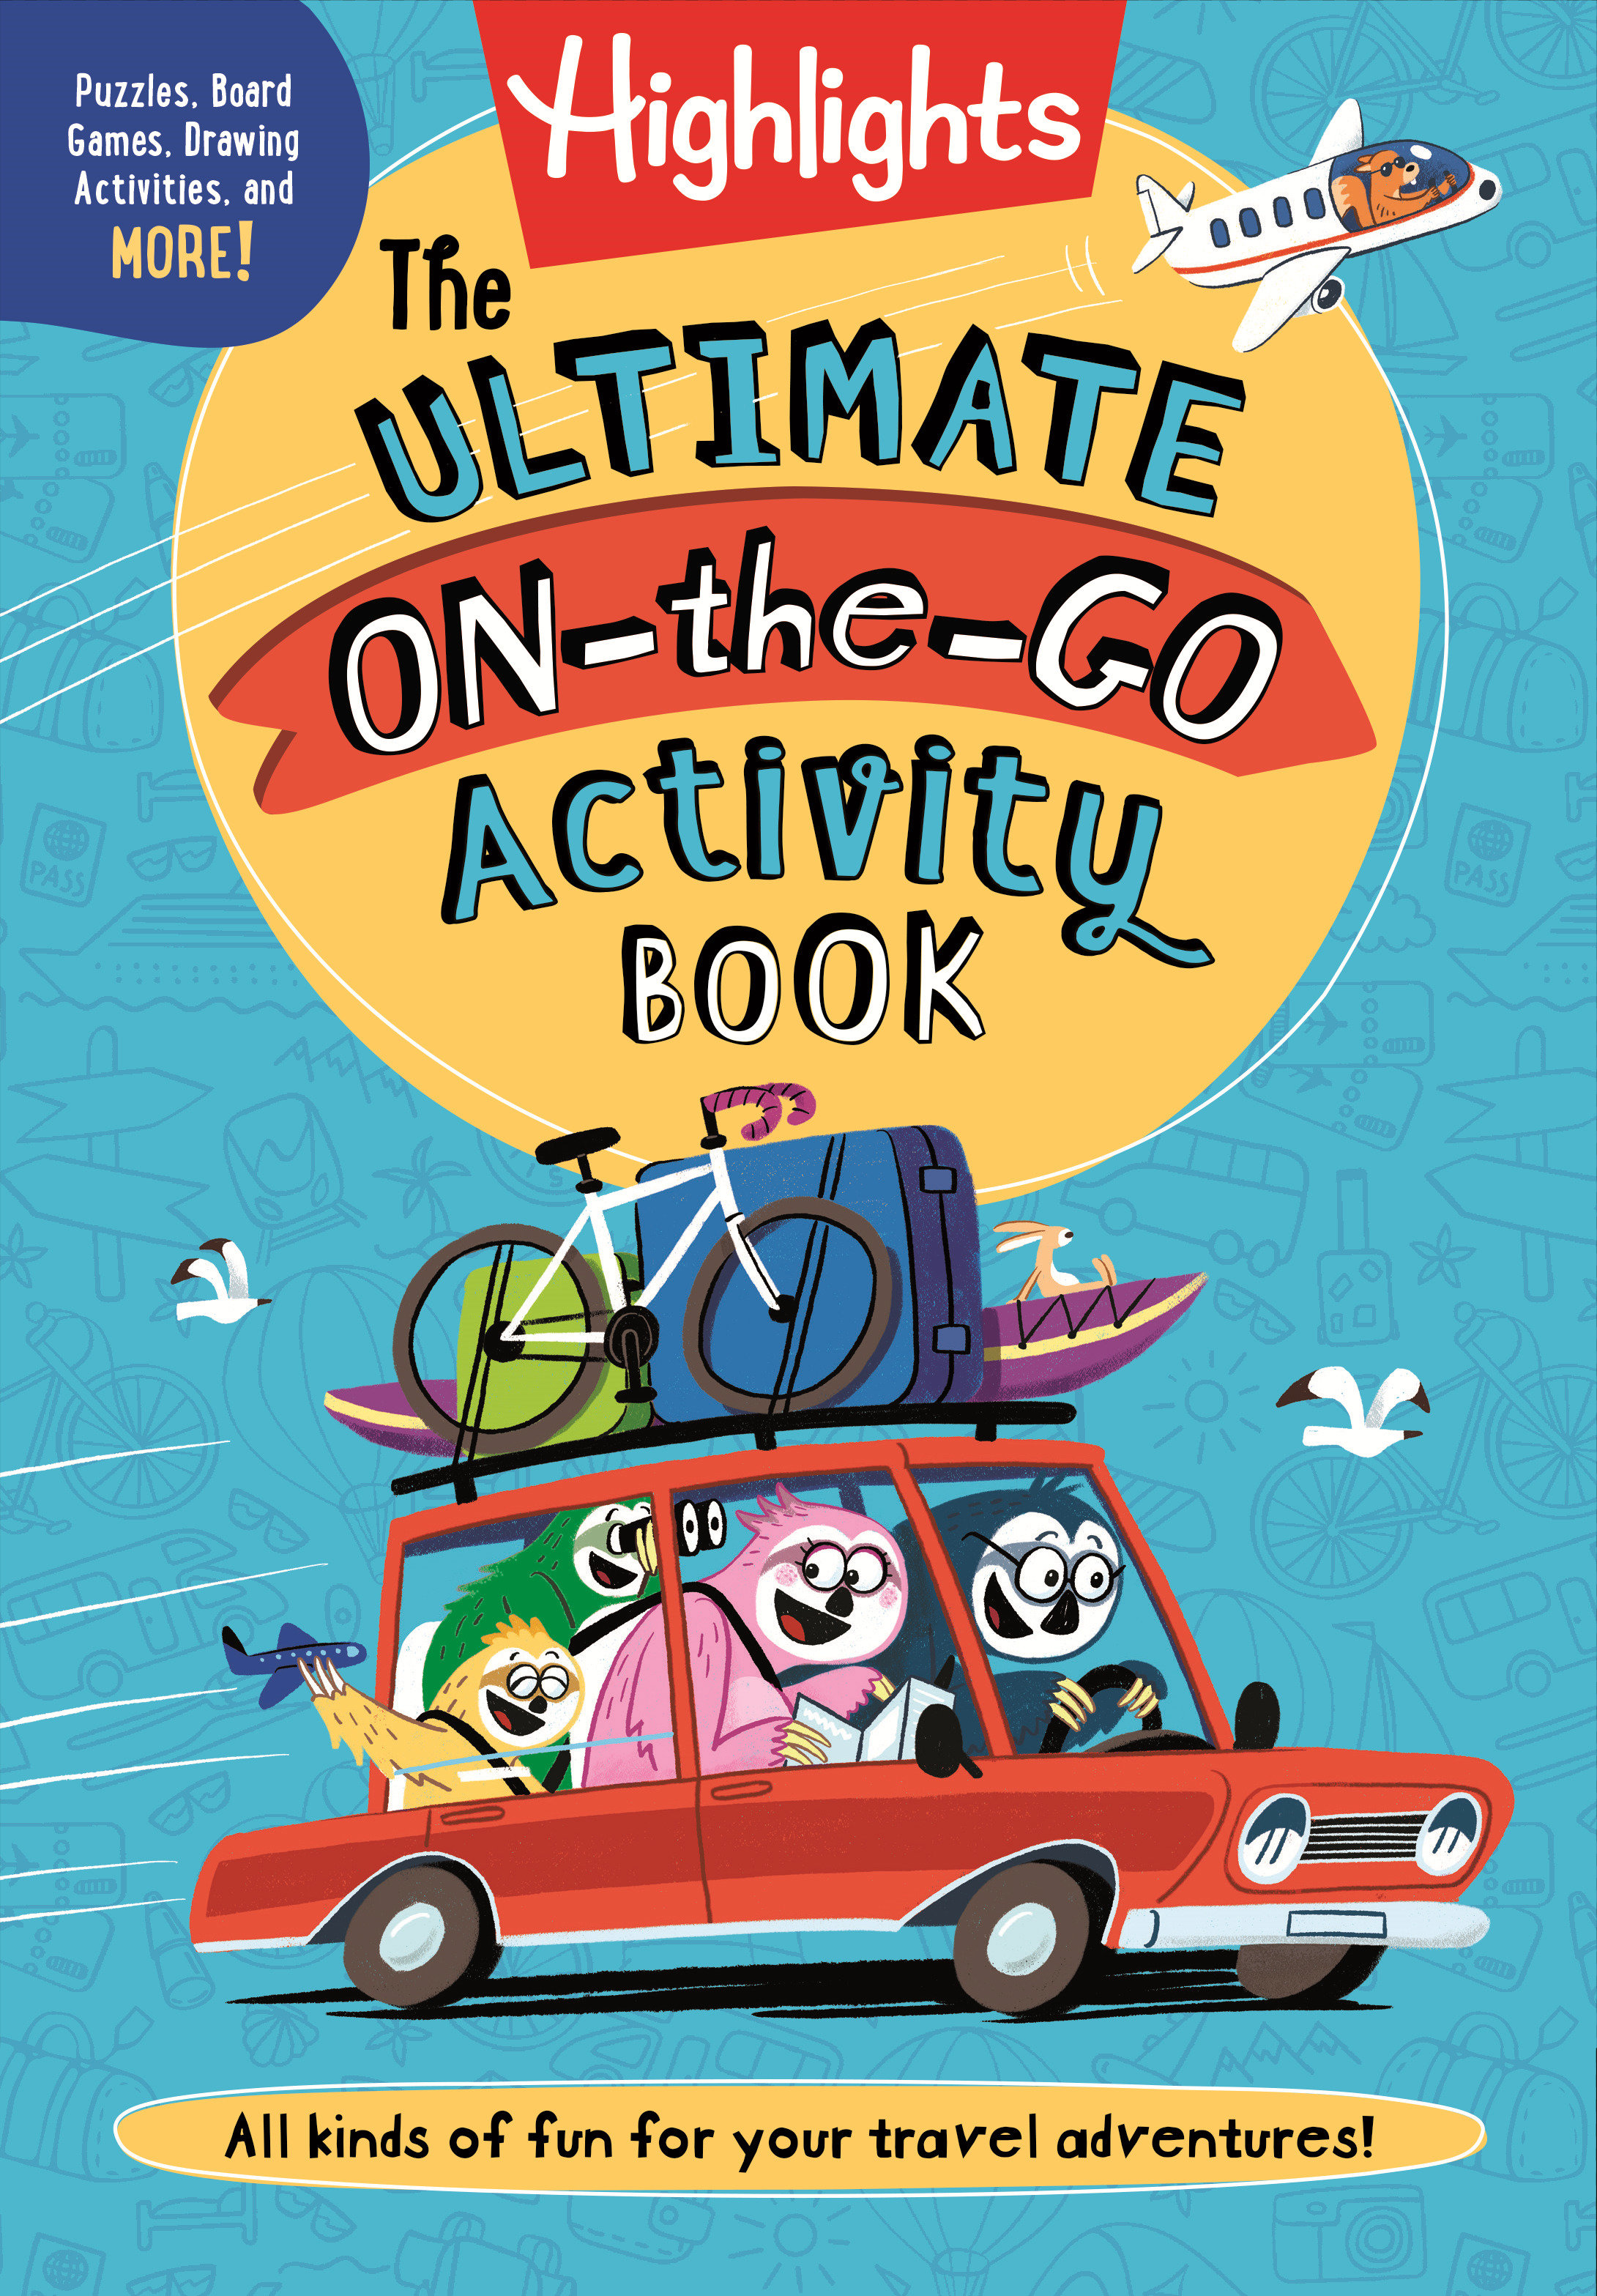 Highlights- The Ultimate On-The-Go Activity Book